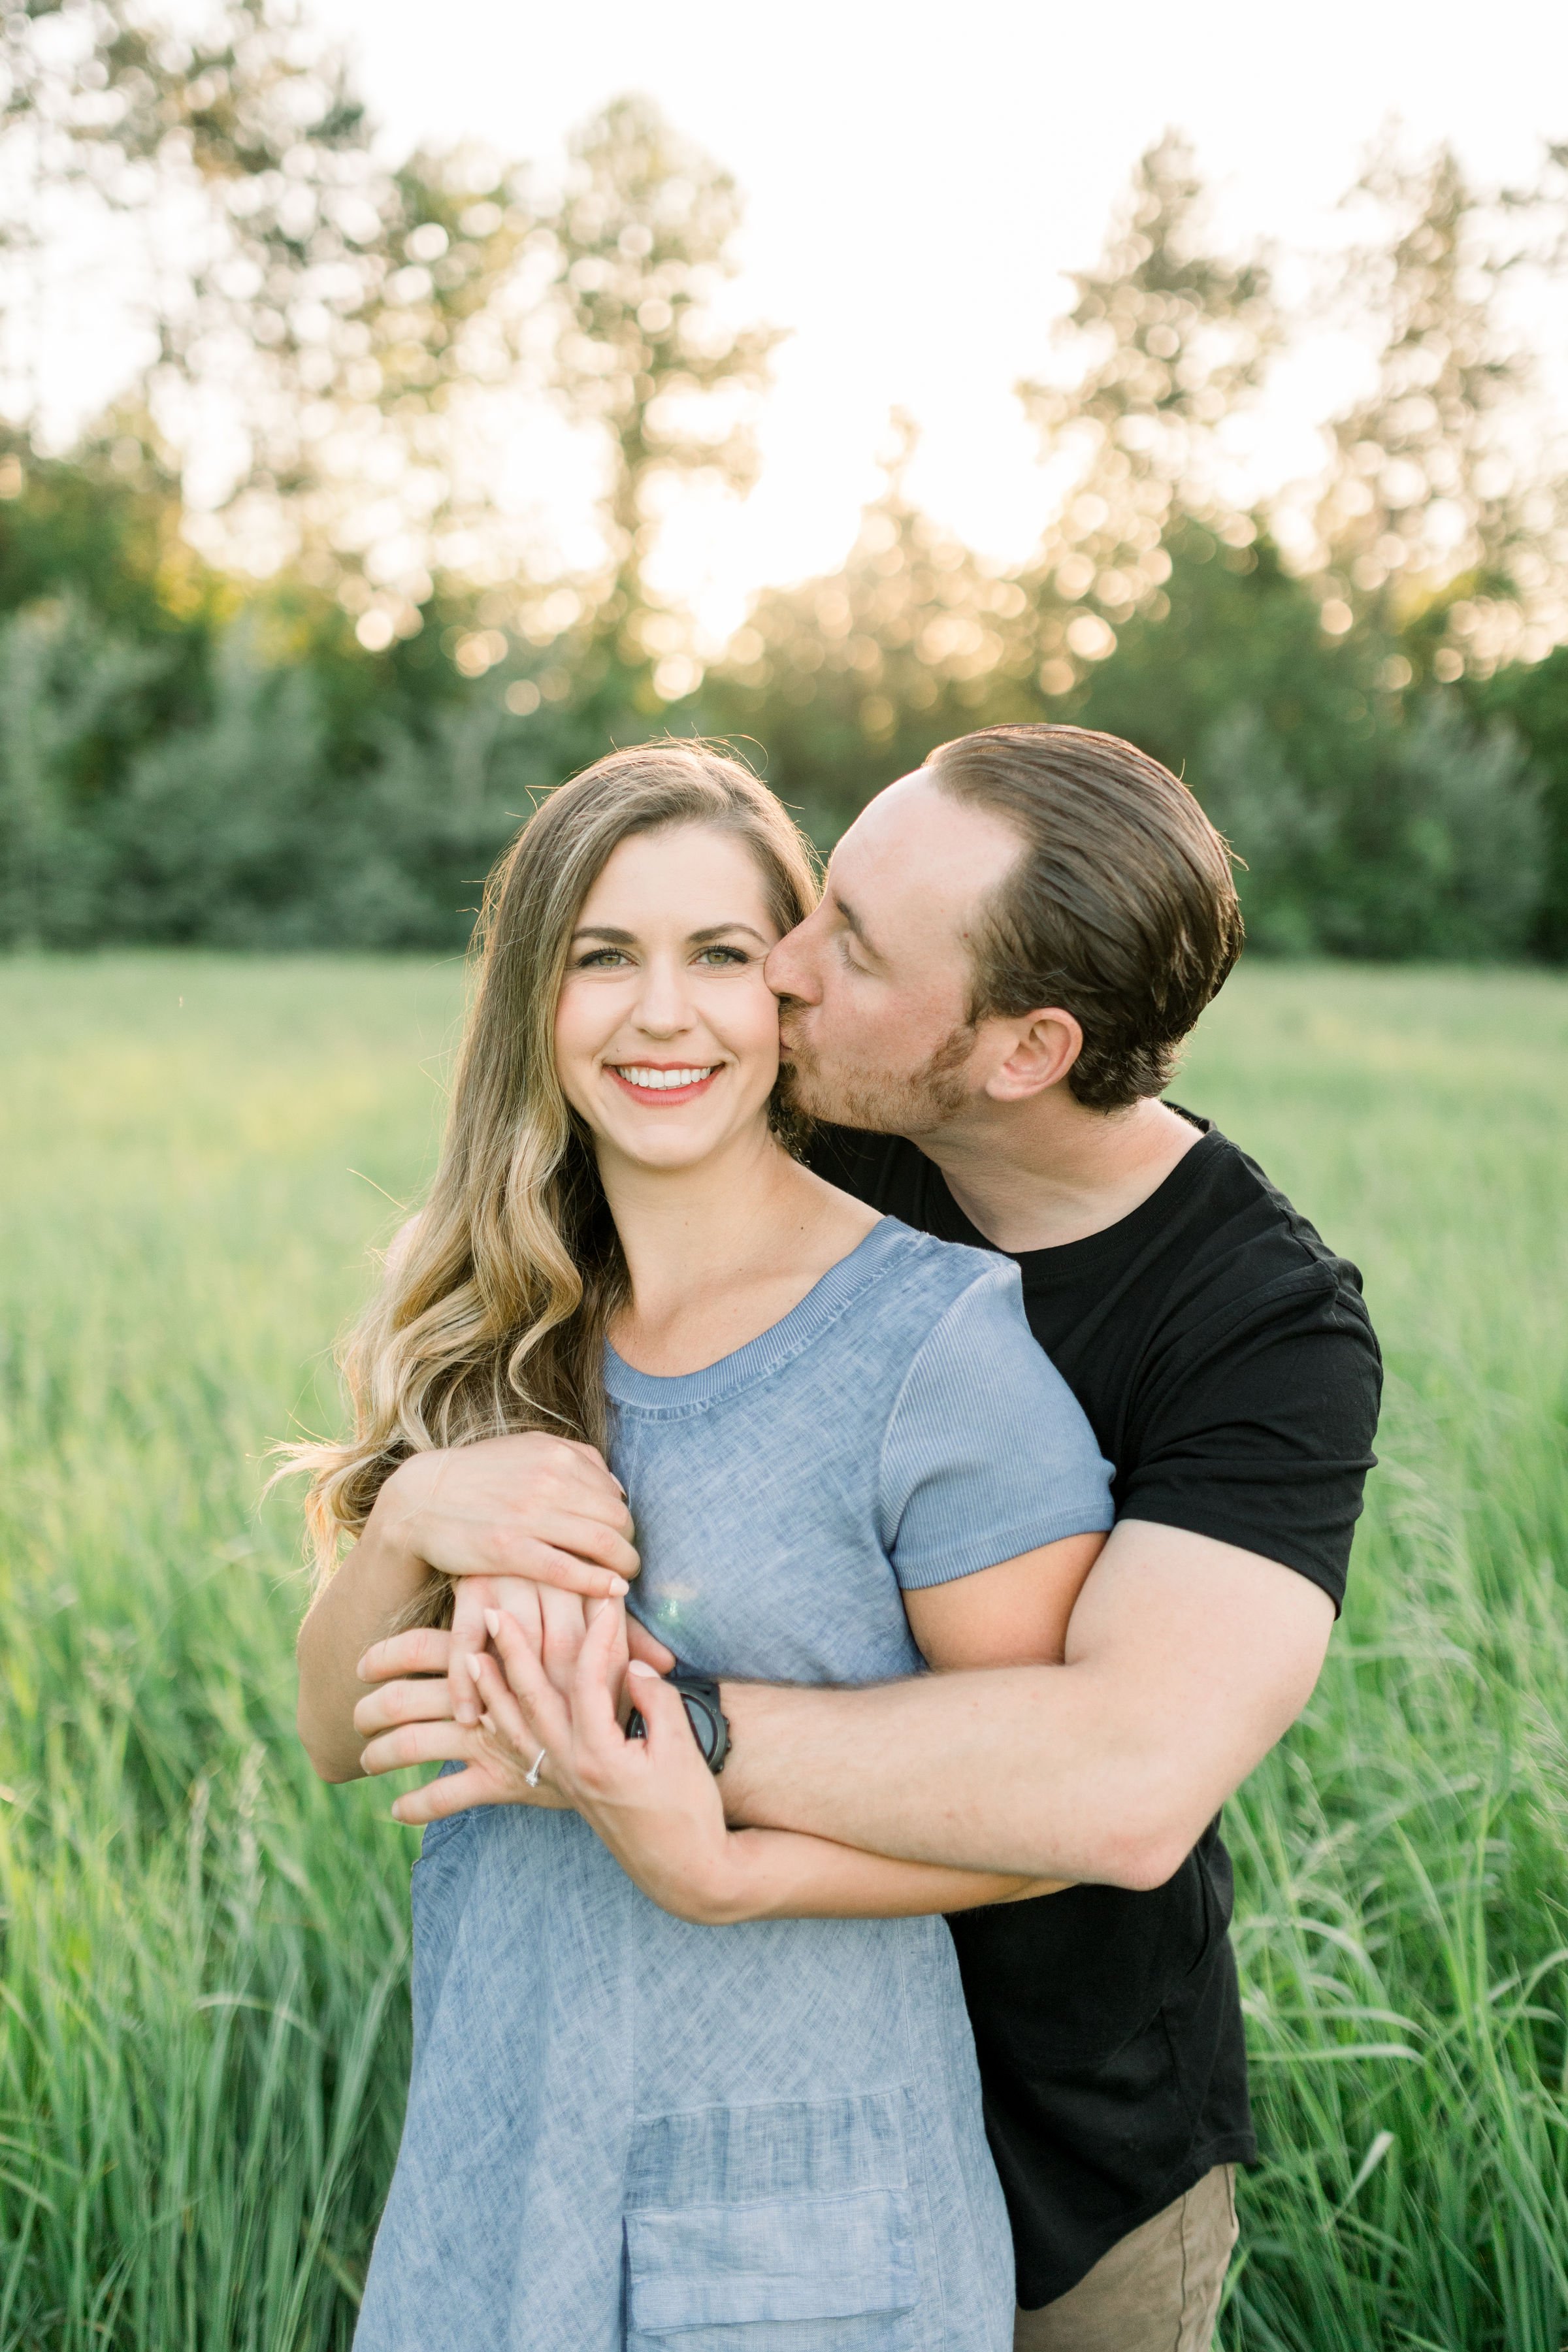  Engagement portrait with a woman looking forward as her fiance holds and kisses her by Chelsea Mason Photography. engagement inspo #chelseamasonphotography #chelseamasonengagements #Ottawaengagments #Almonteengagementphotographer #outdoorengagments 